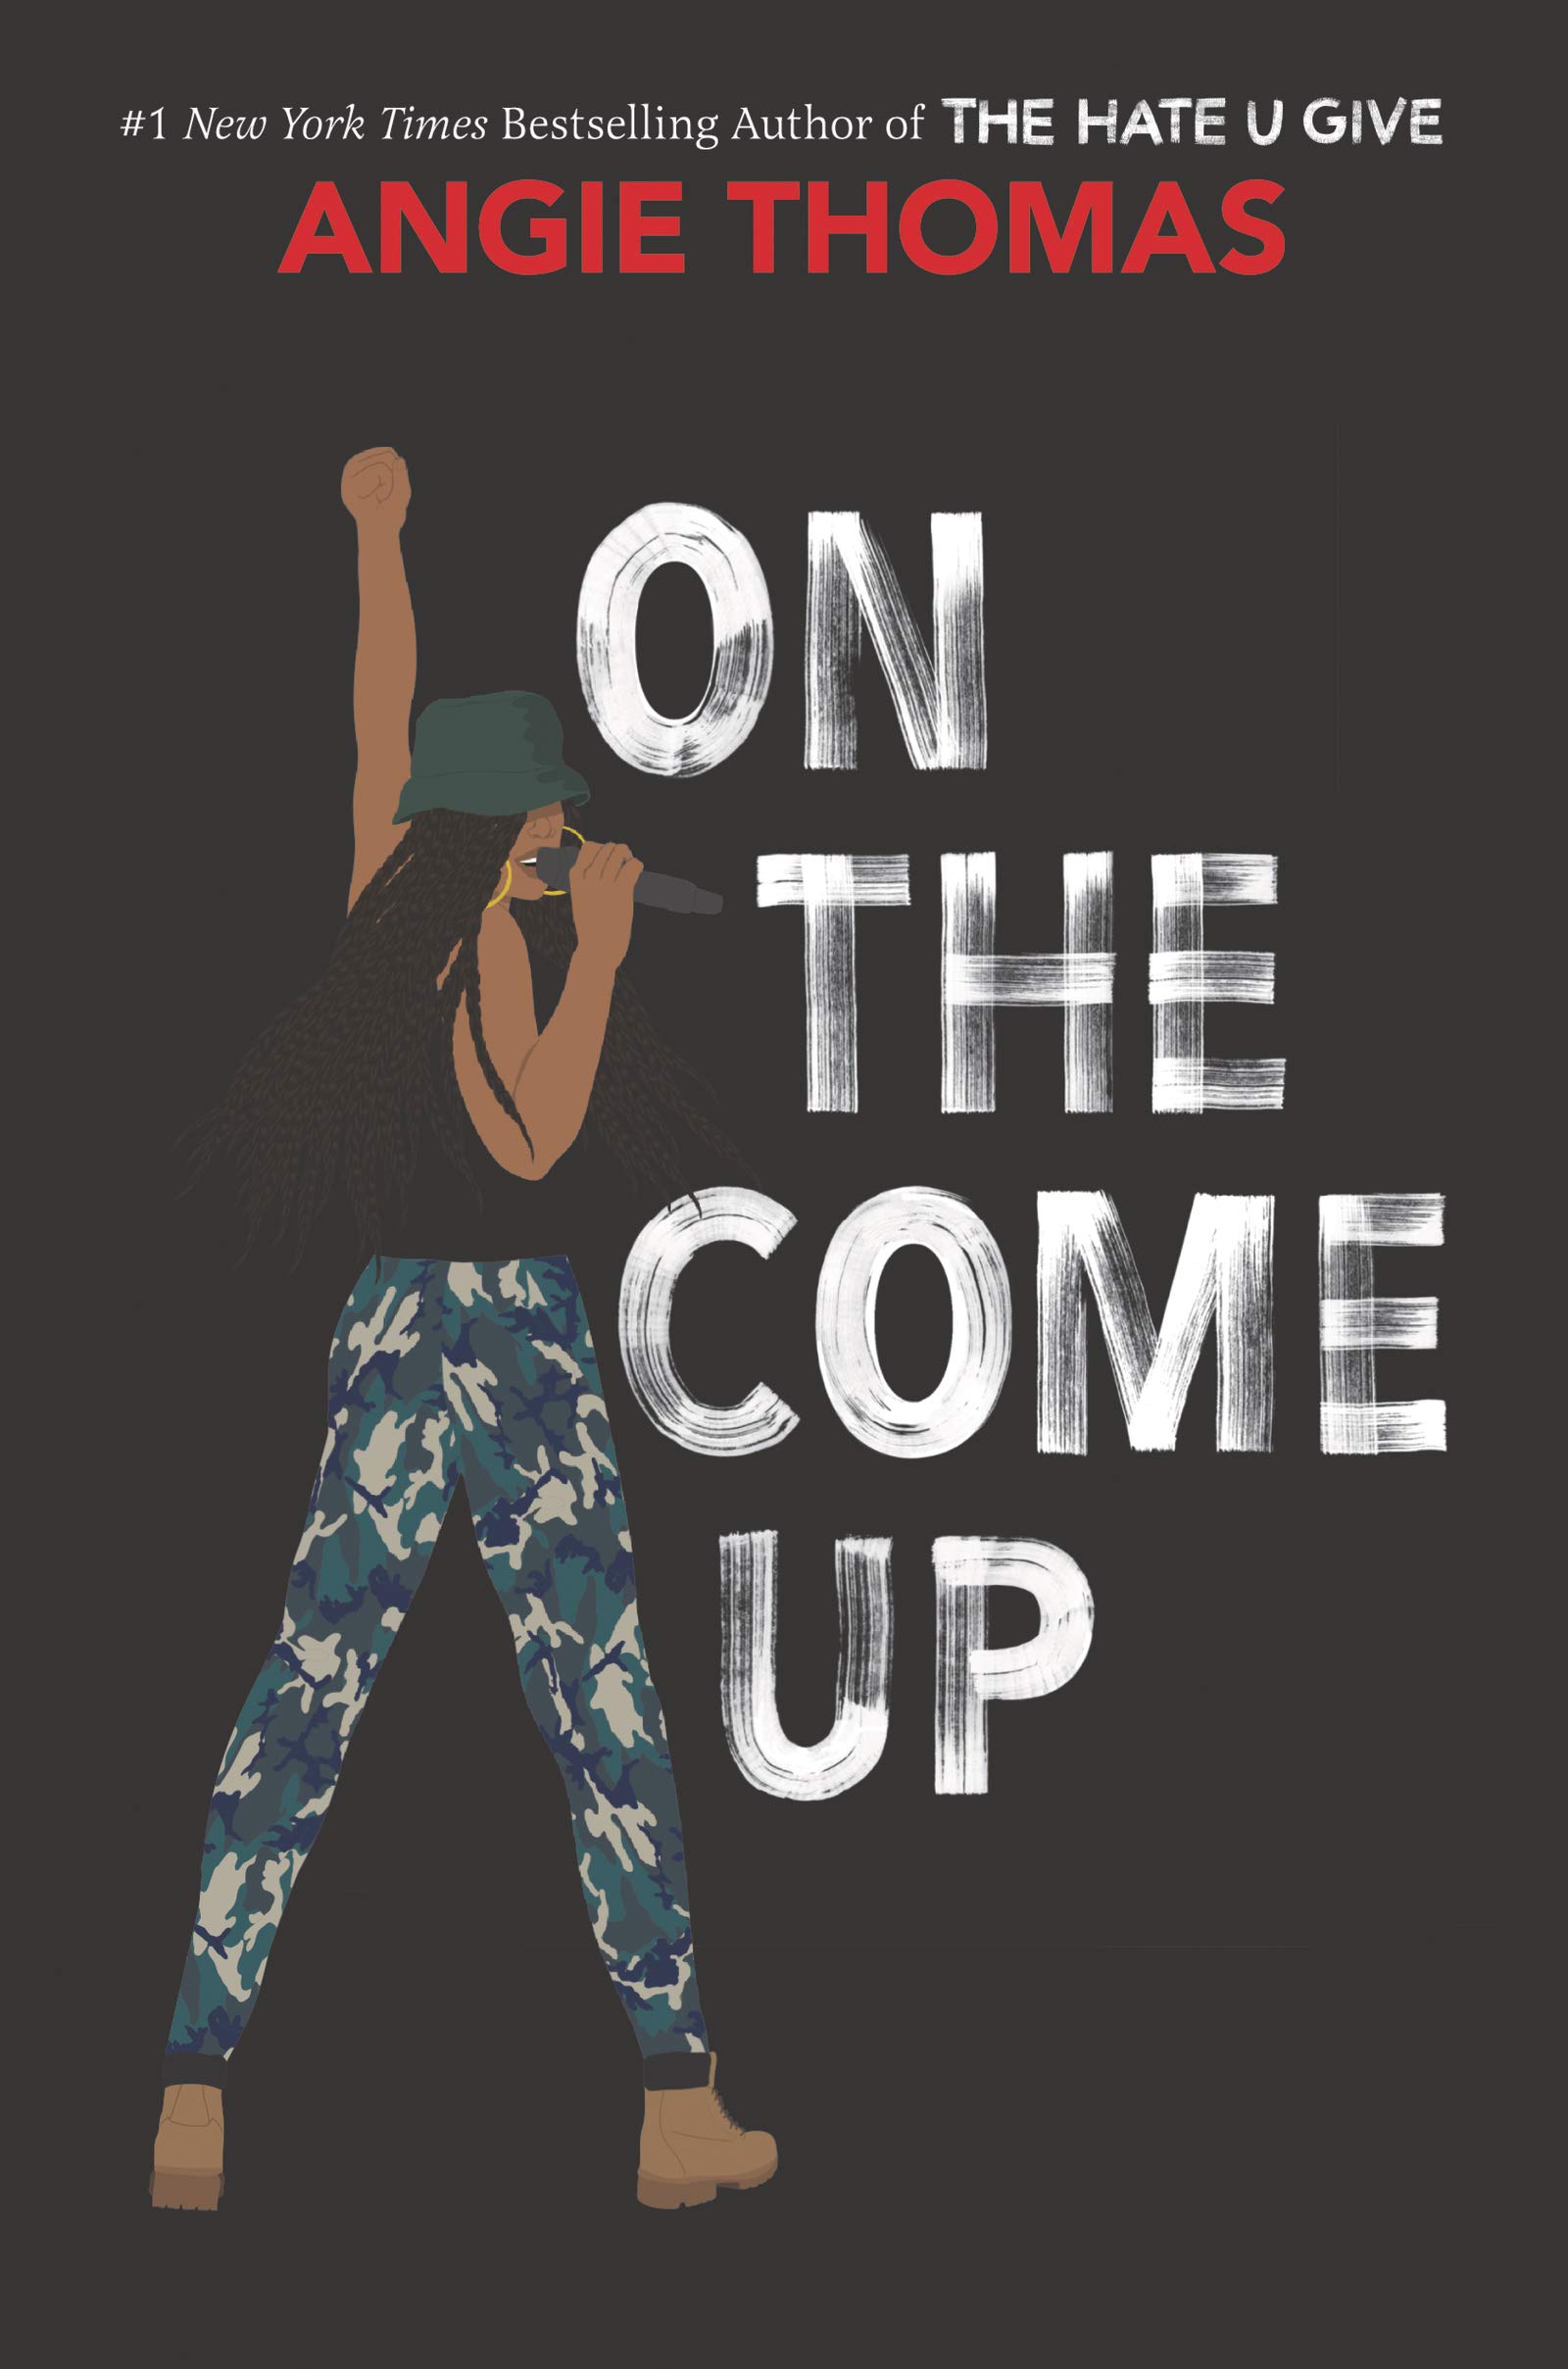 On the Come Up | Angie Thomas